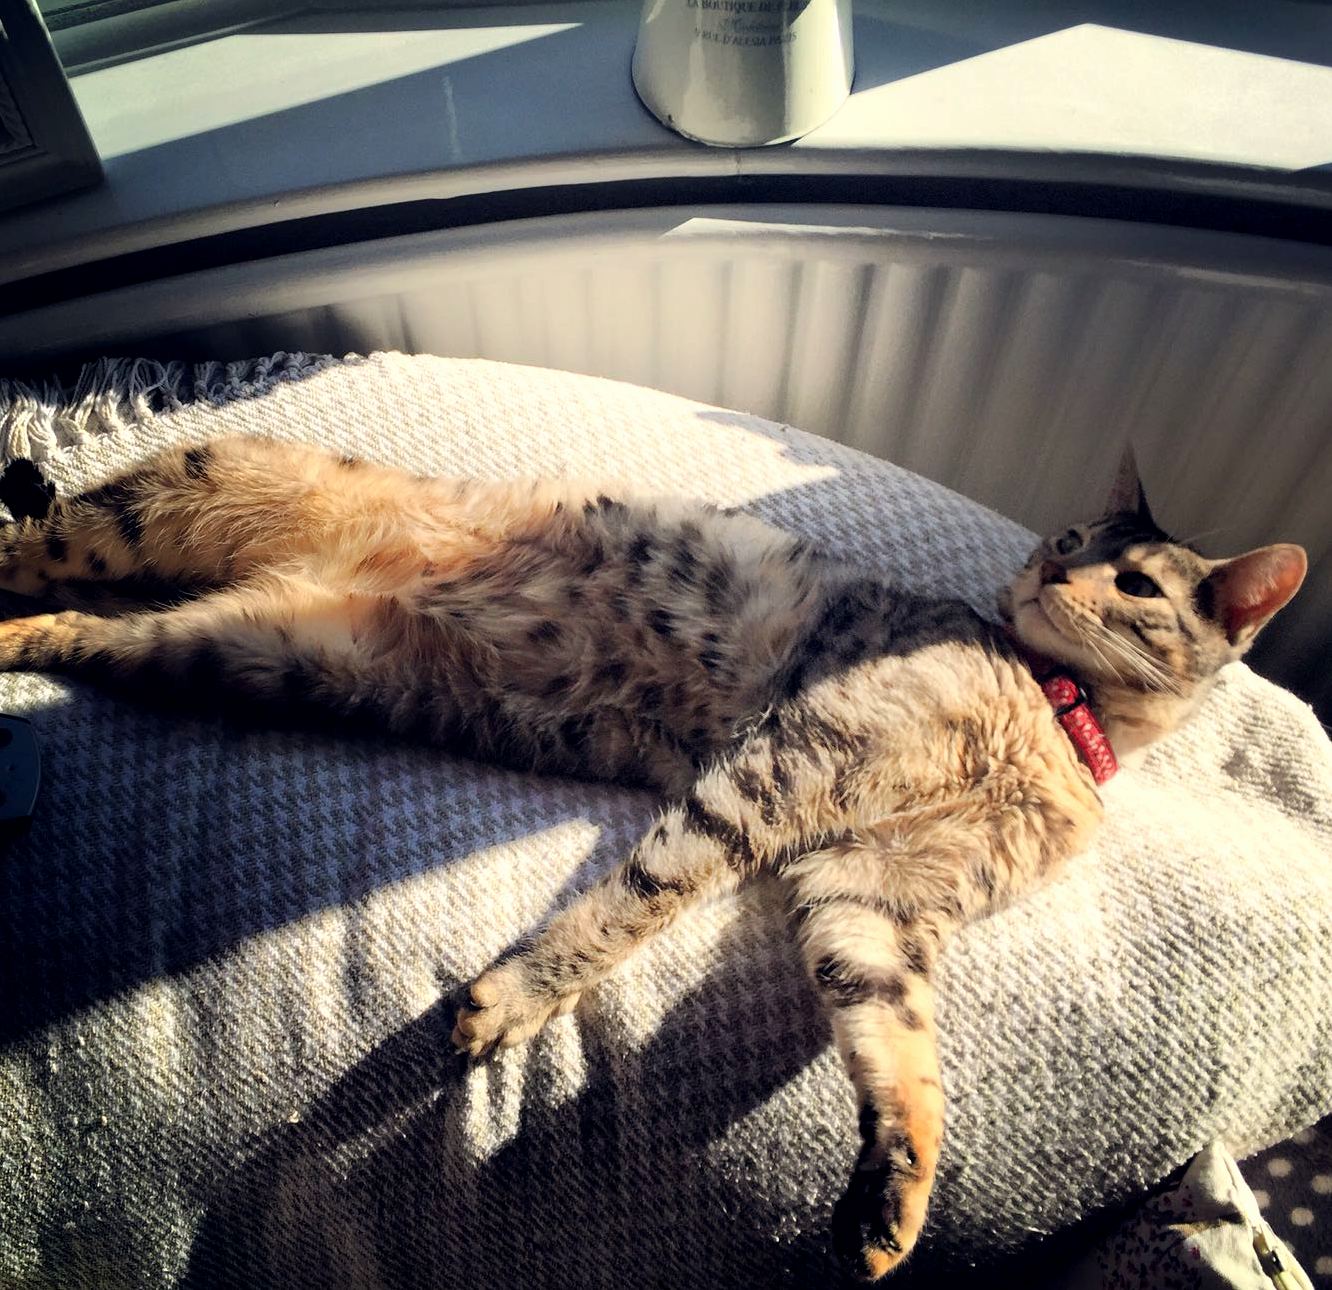 Nothing about this twisted sunbathing gesture looks comfortable.